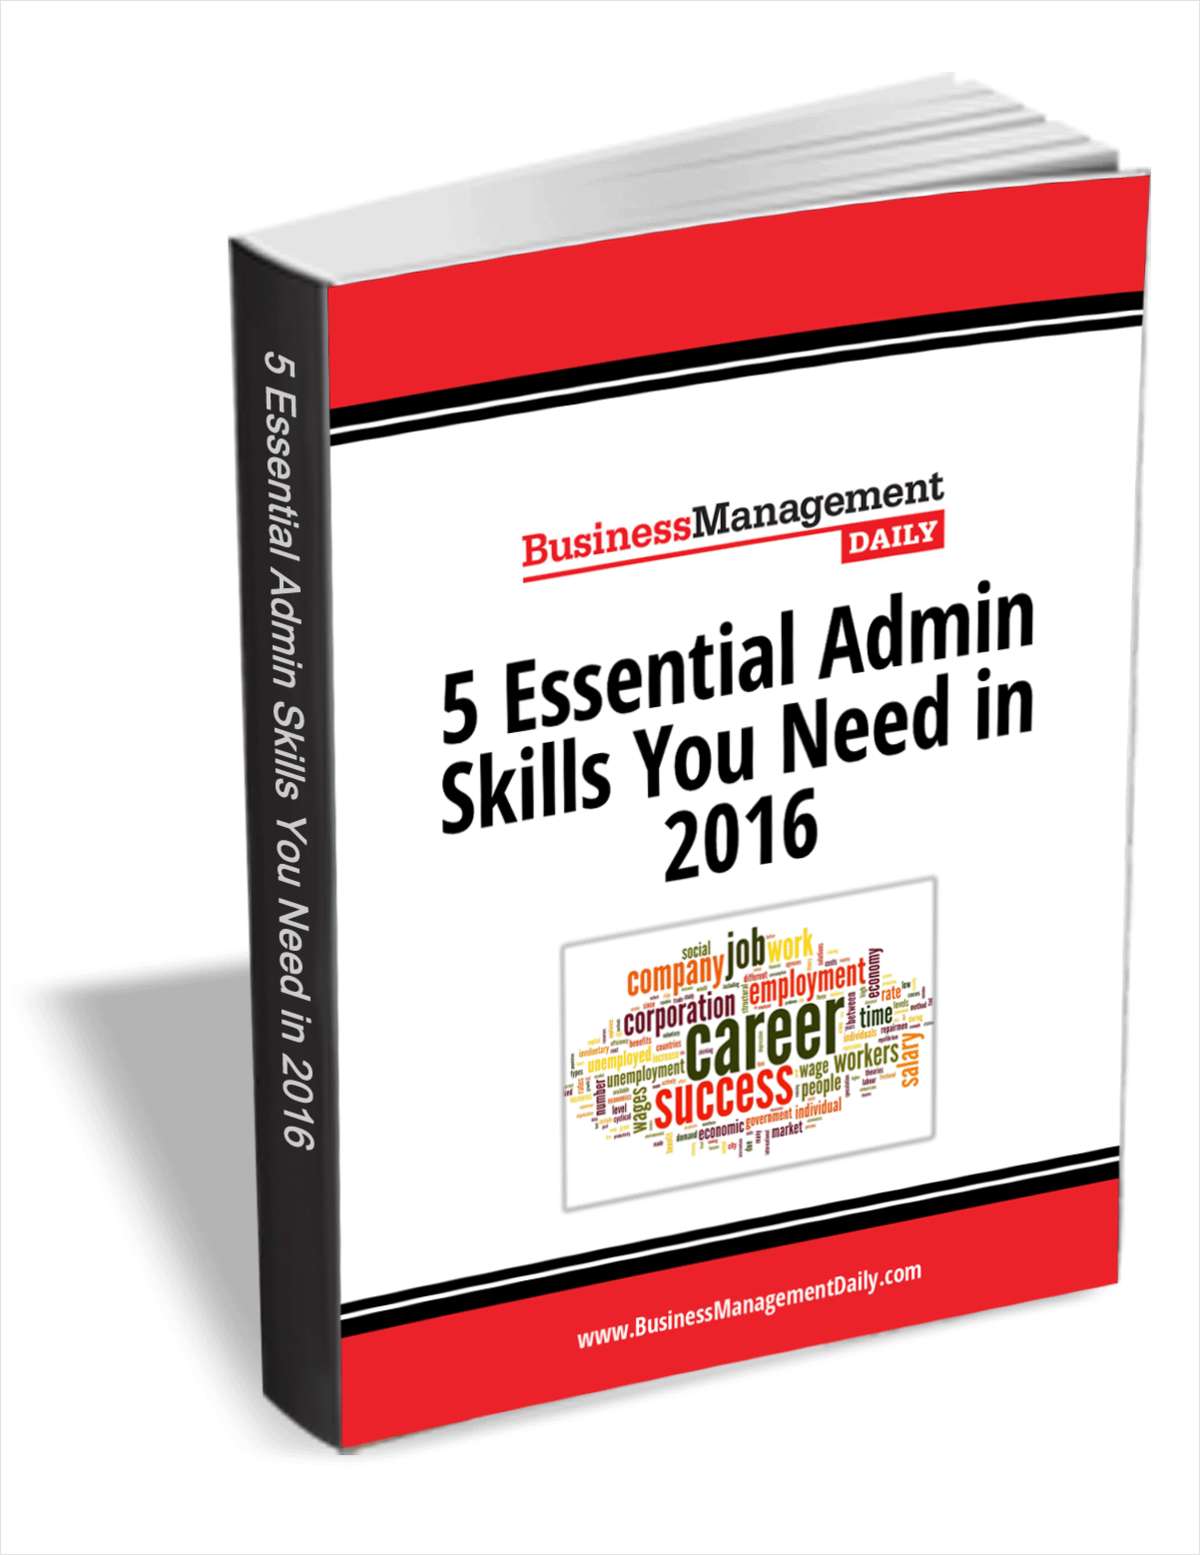 5 Essential Admin Skills You Need in 2016